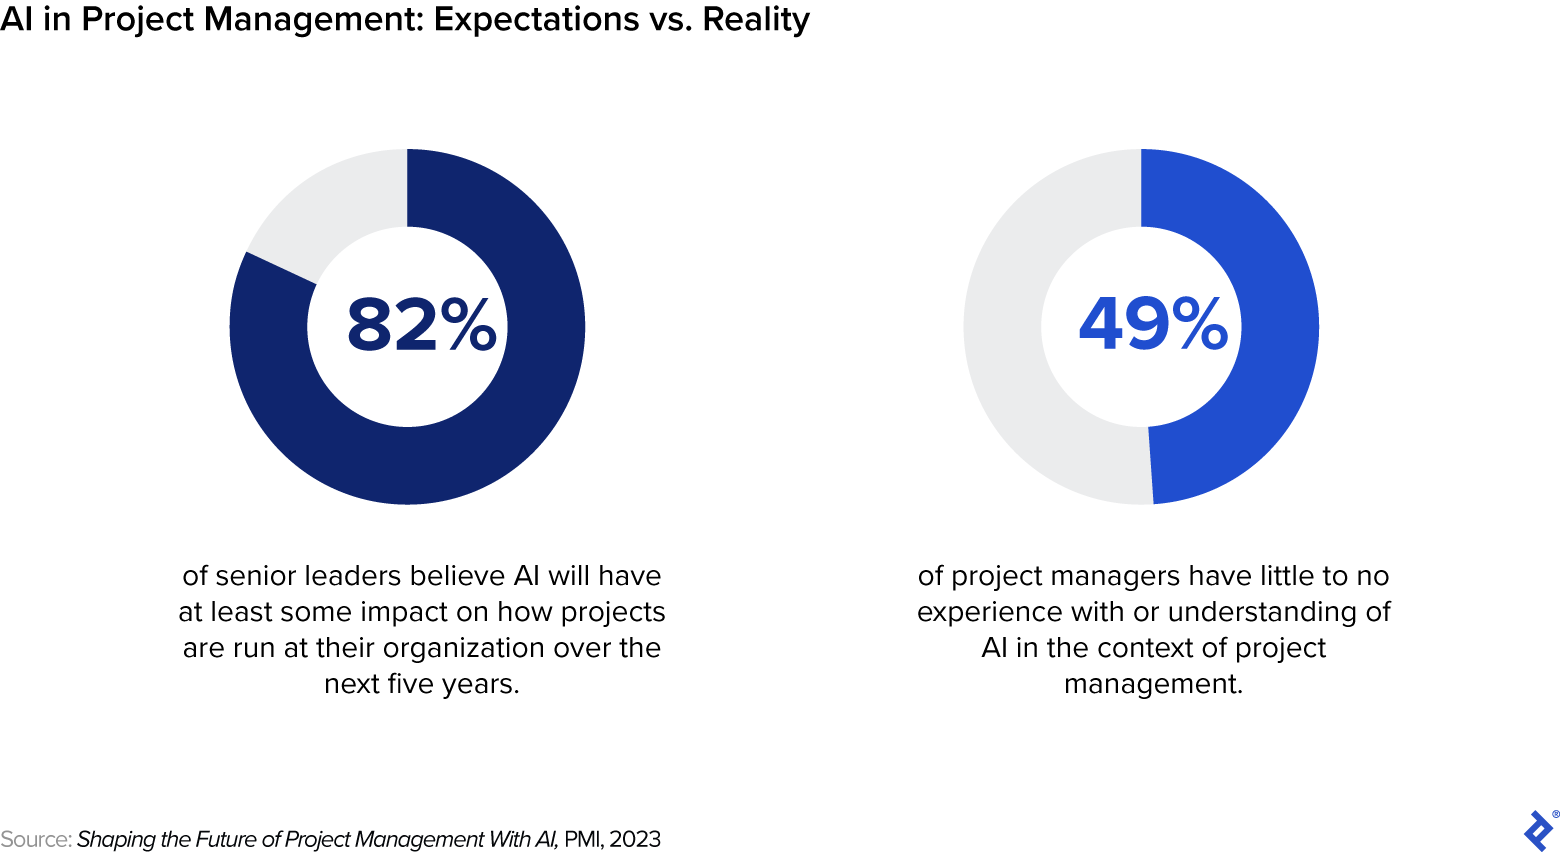 Most senior leaders expect AI to impact project management at their organizations, but half of project managers don’t know how to incorporate it.